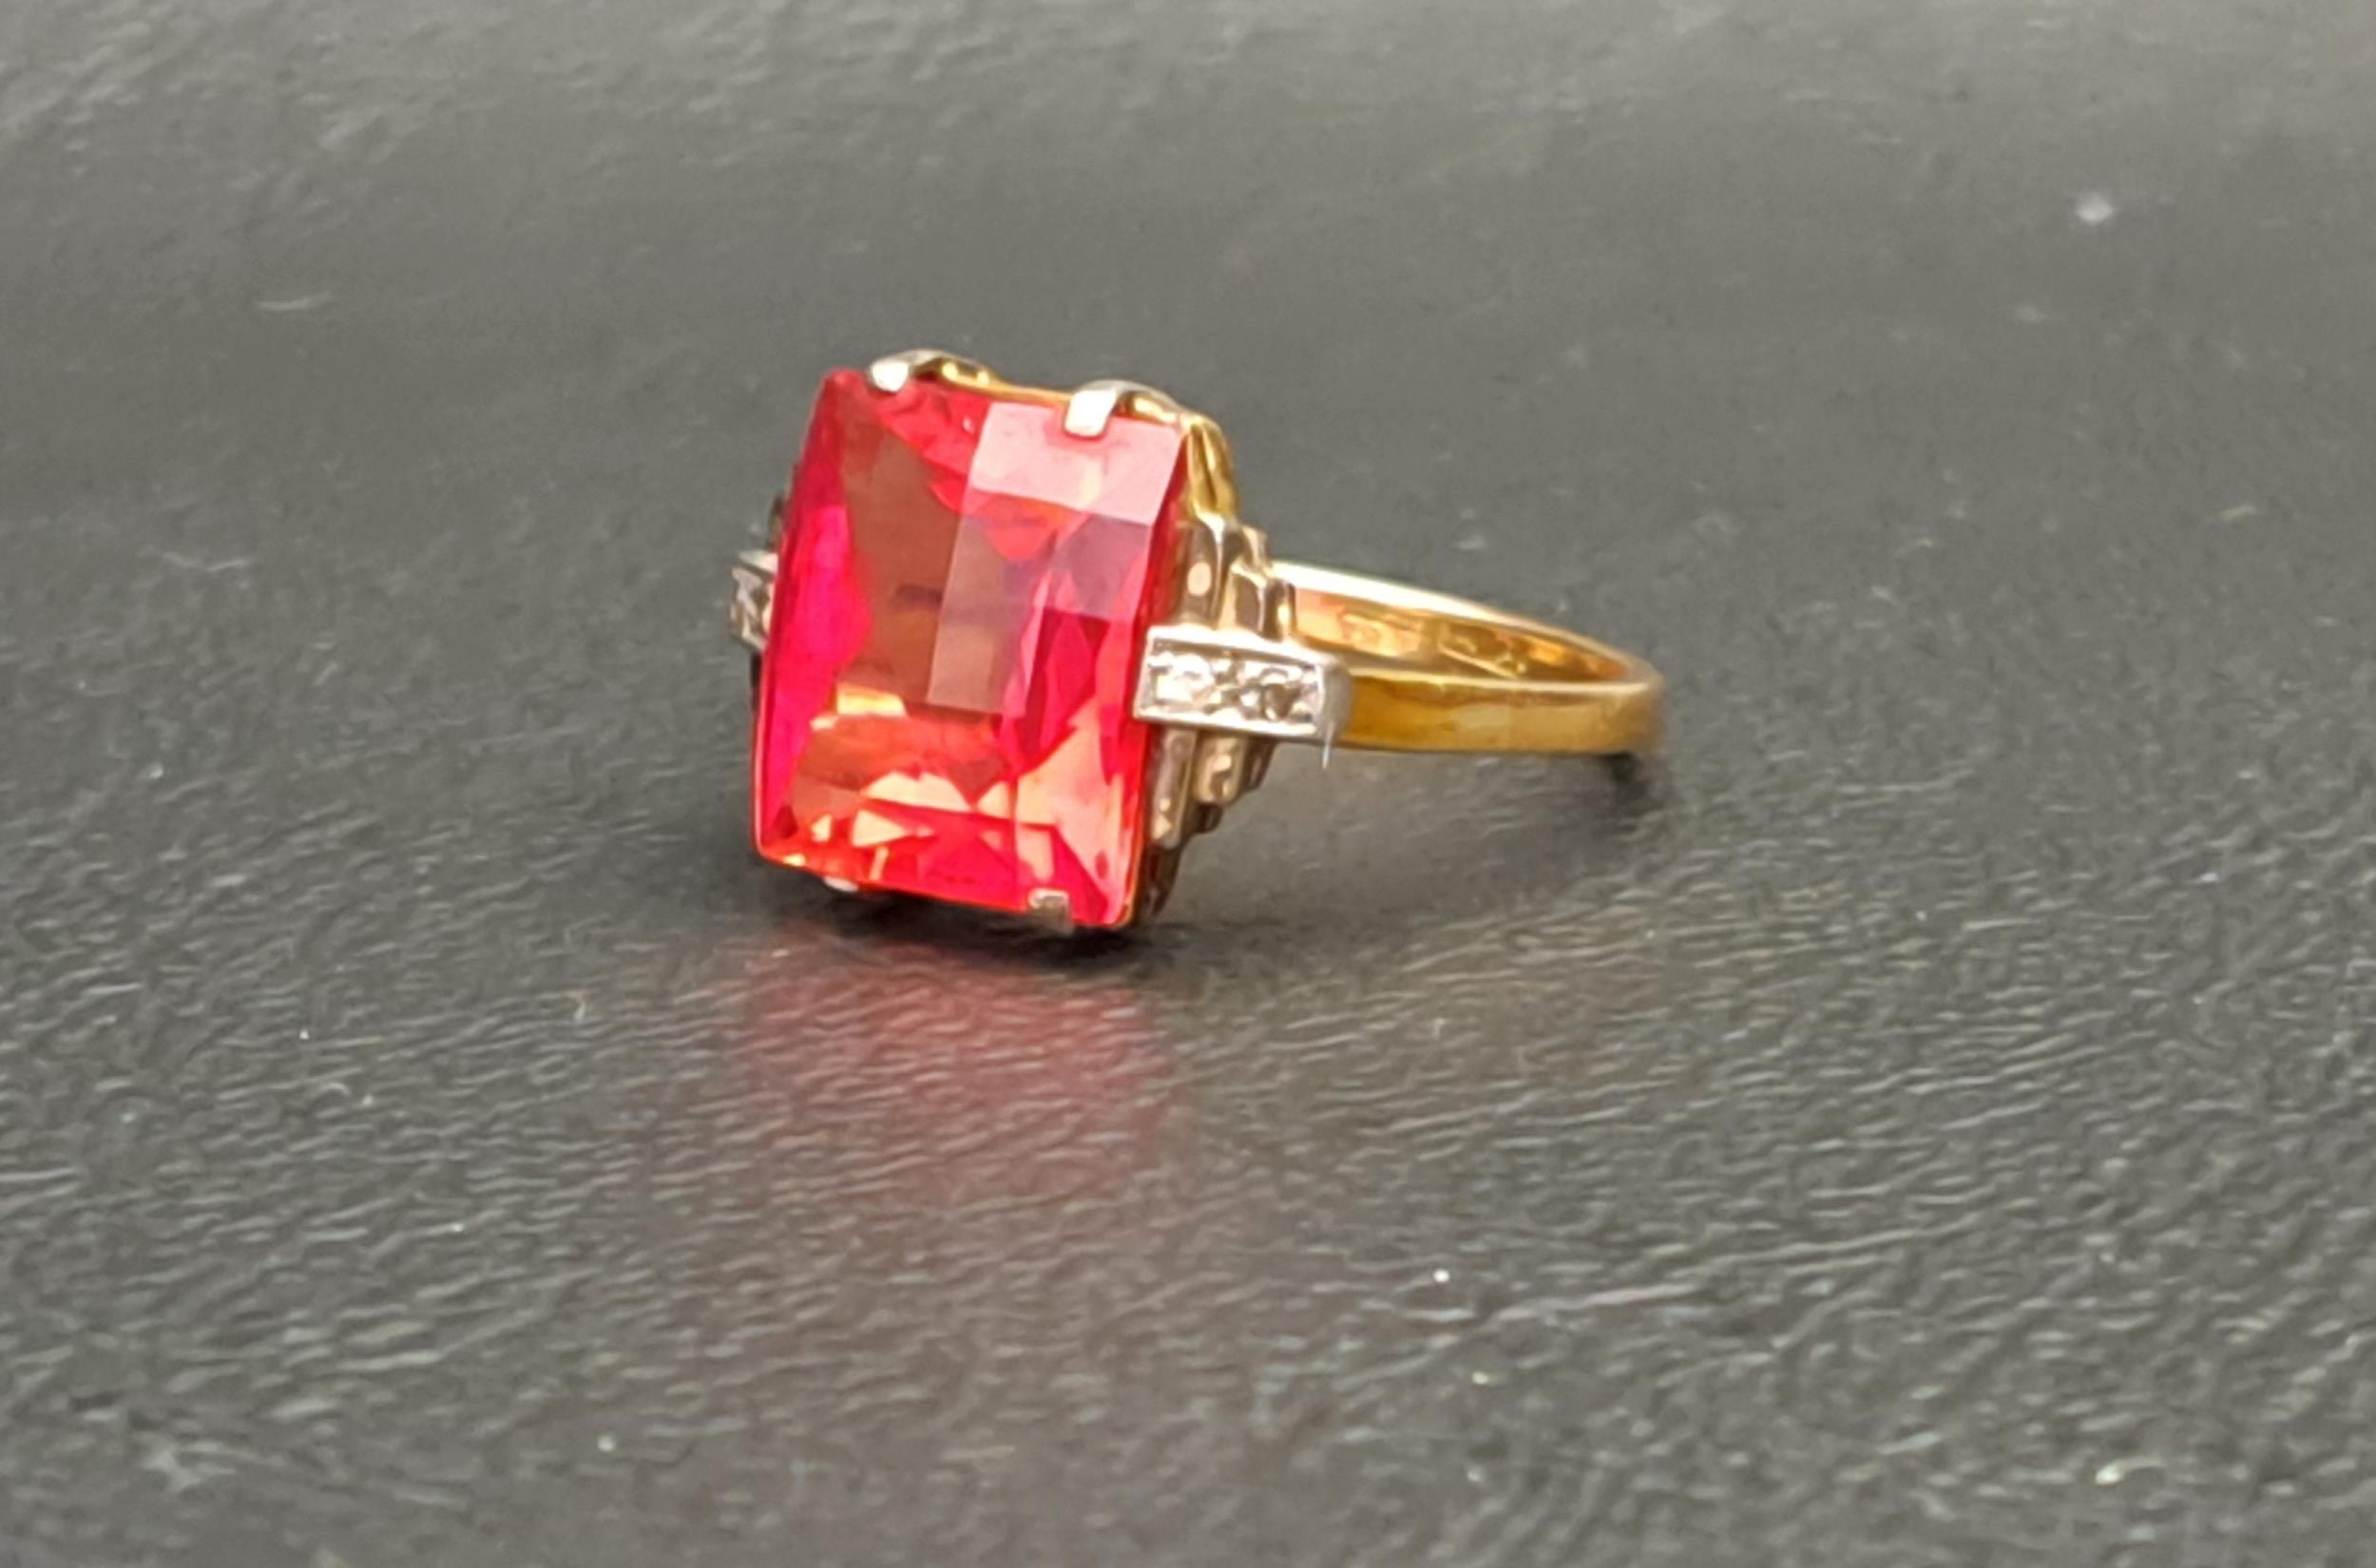 RED GEM AND DIAMOND SET RING the central checkerboard cut gemstone possibly ruby and measuring